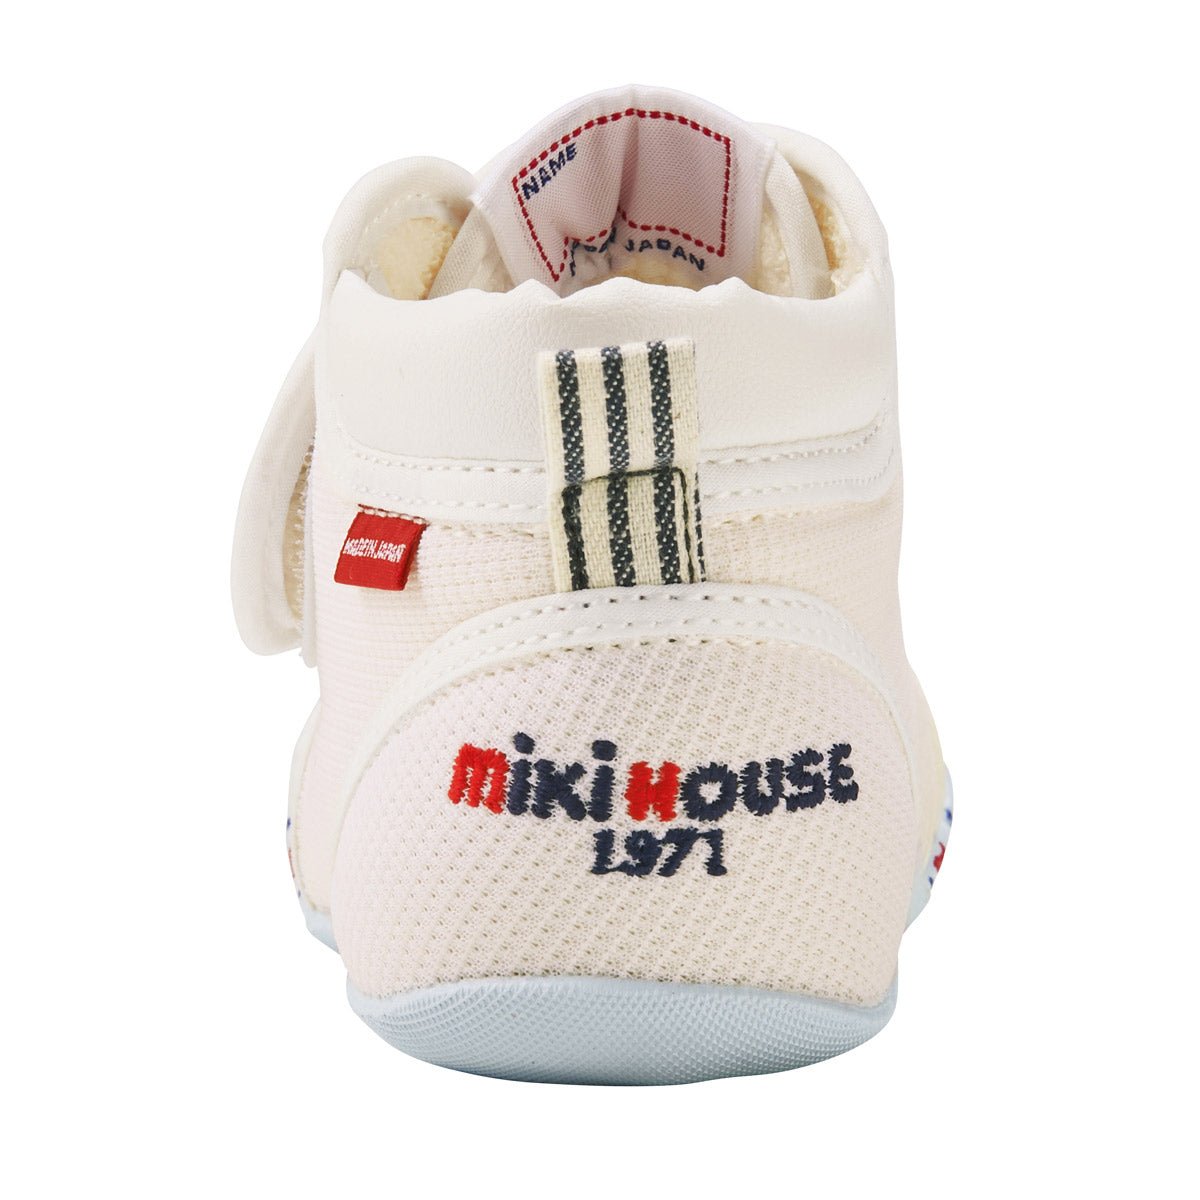 My First Walker shoes - Classic - MIKI HOUSE USA